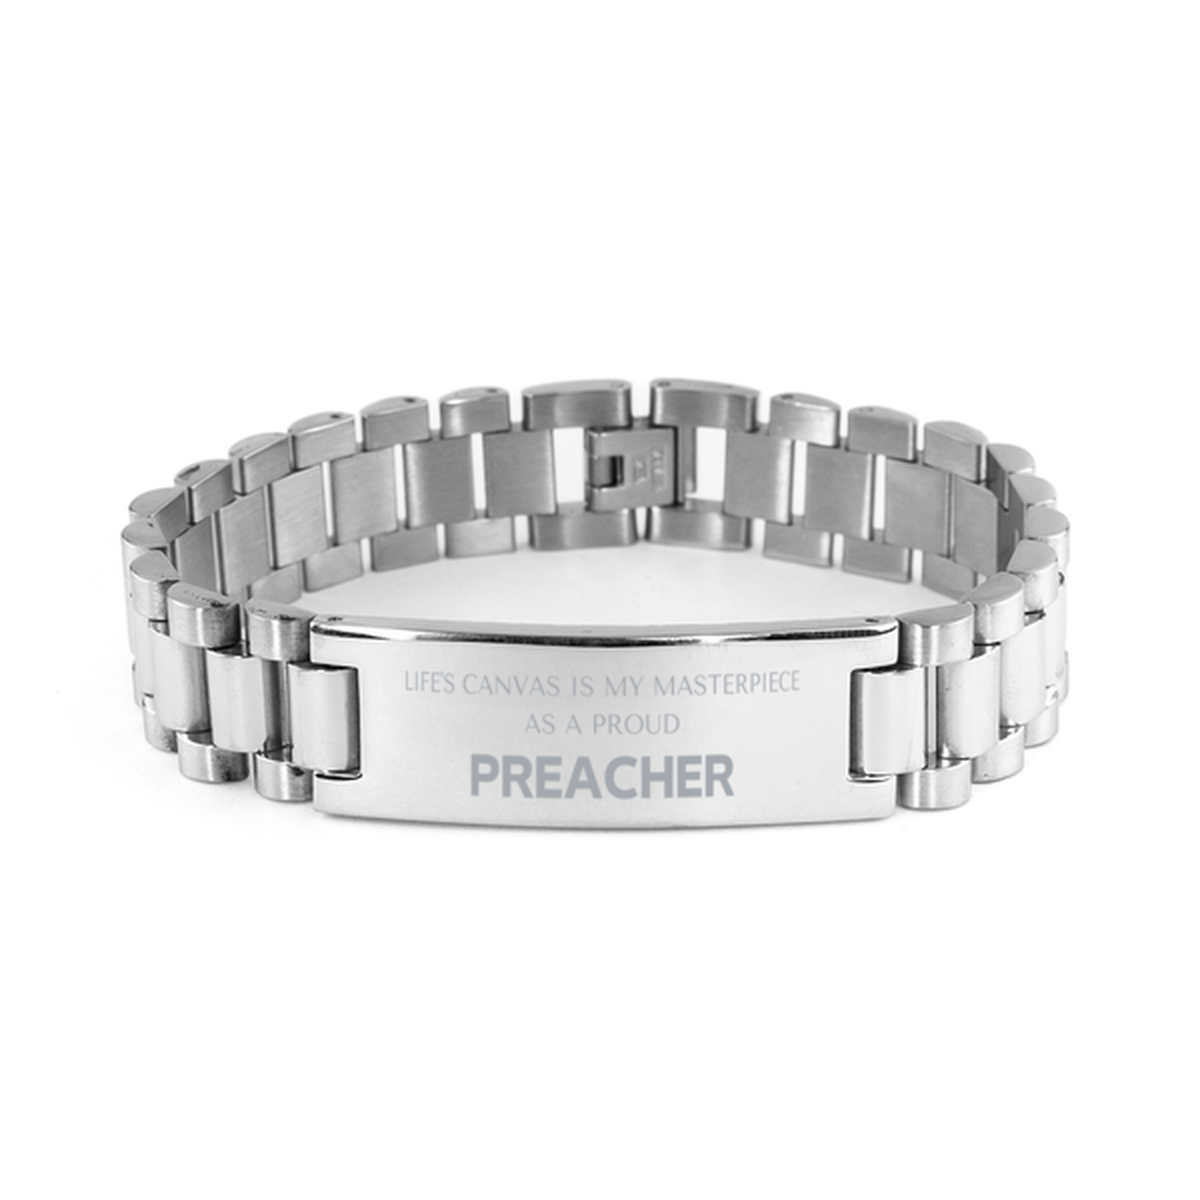 Proud Preacher Gifts, Life's canvas is my masterpiece, Epic Birthday Christmas Unique Ladder Stainless Steel Bracelet For Preacher, Coworkers, Men, Women, Friends